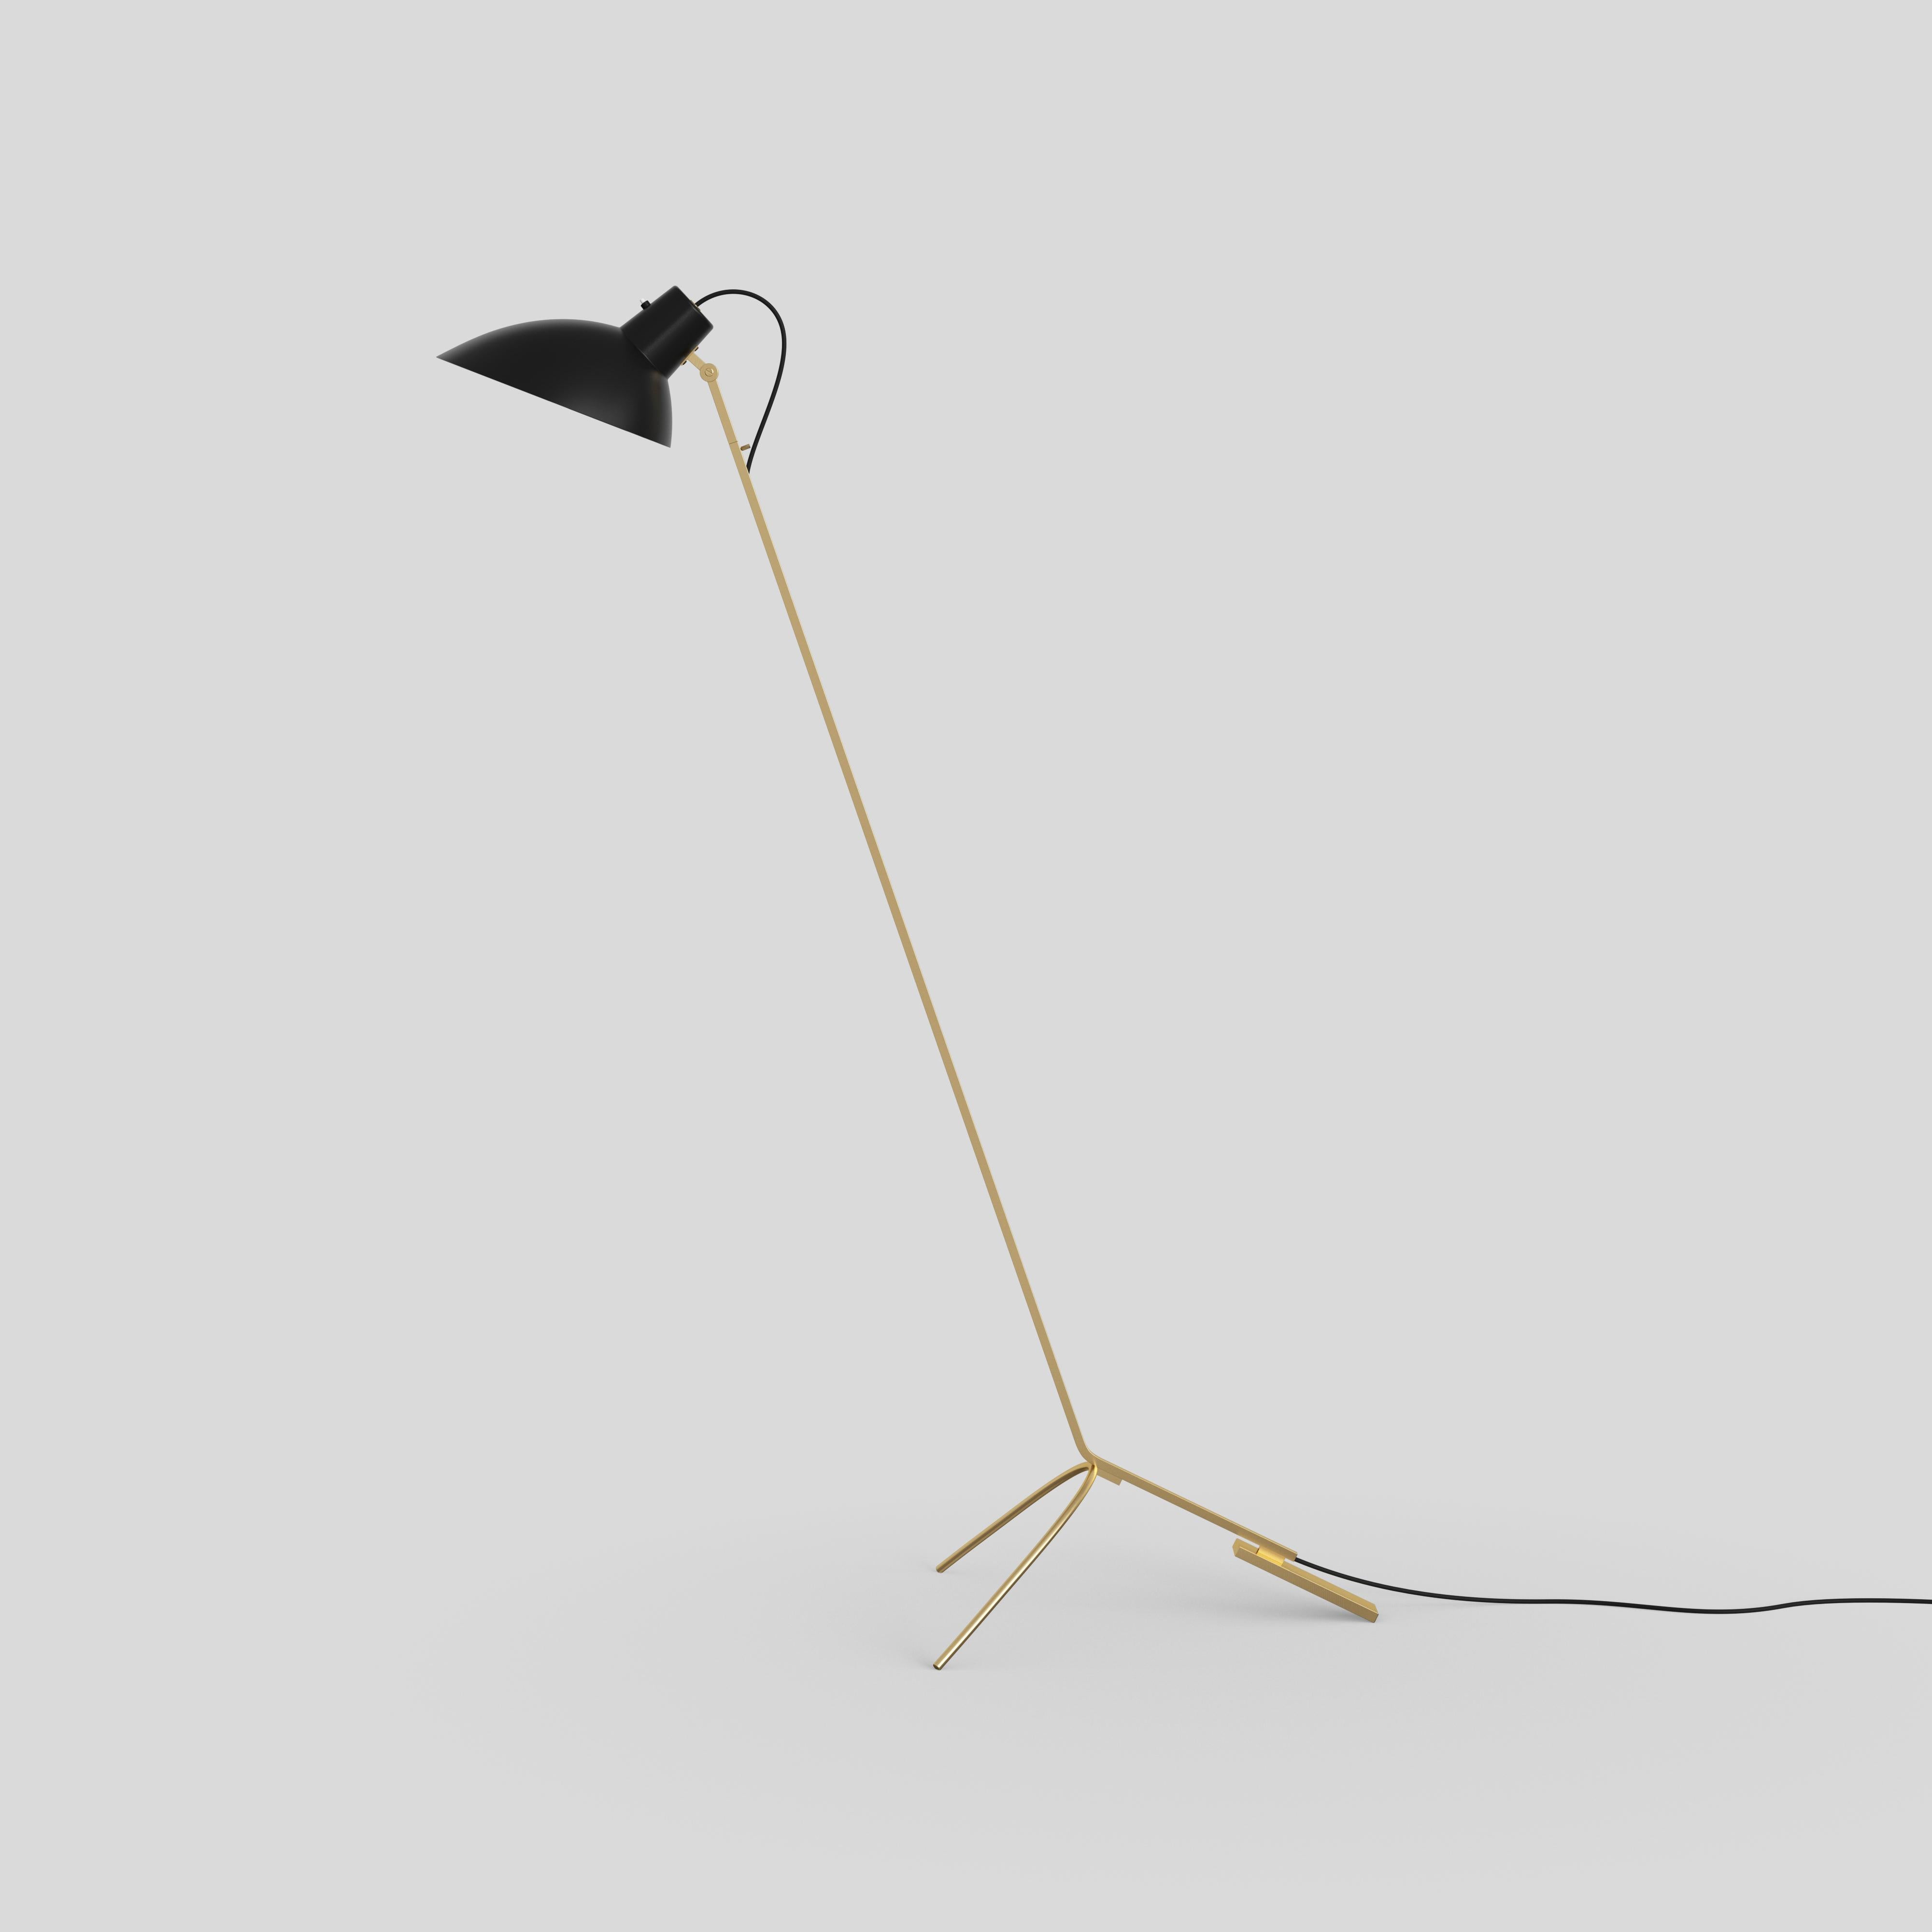 VV Cinquanta floor lamp
Design by Vittoriano Viganò
This version is with black lacquered reflector and brass frame.

The VV Cinquanta features an elegant and versatile posable direct light source that can swivel and tilt, from direct working light